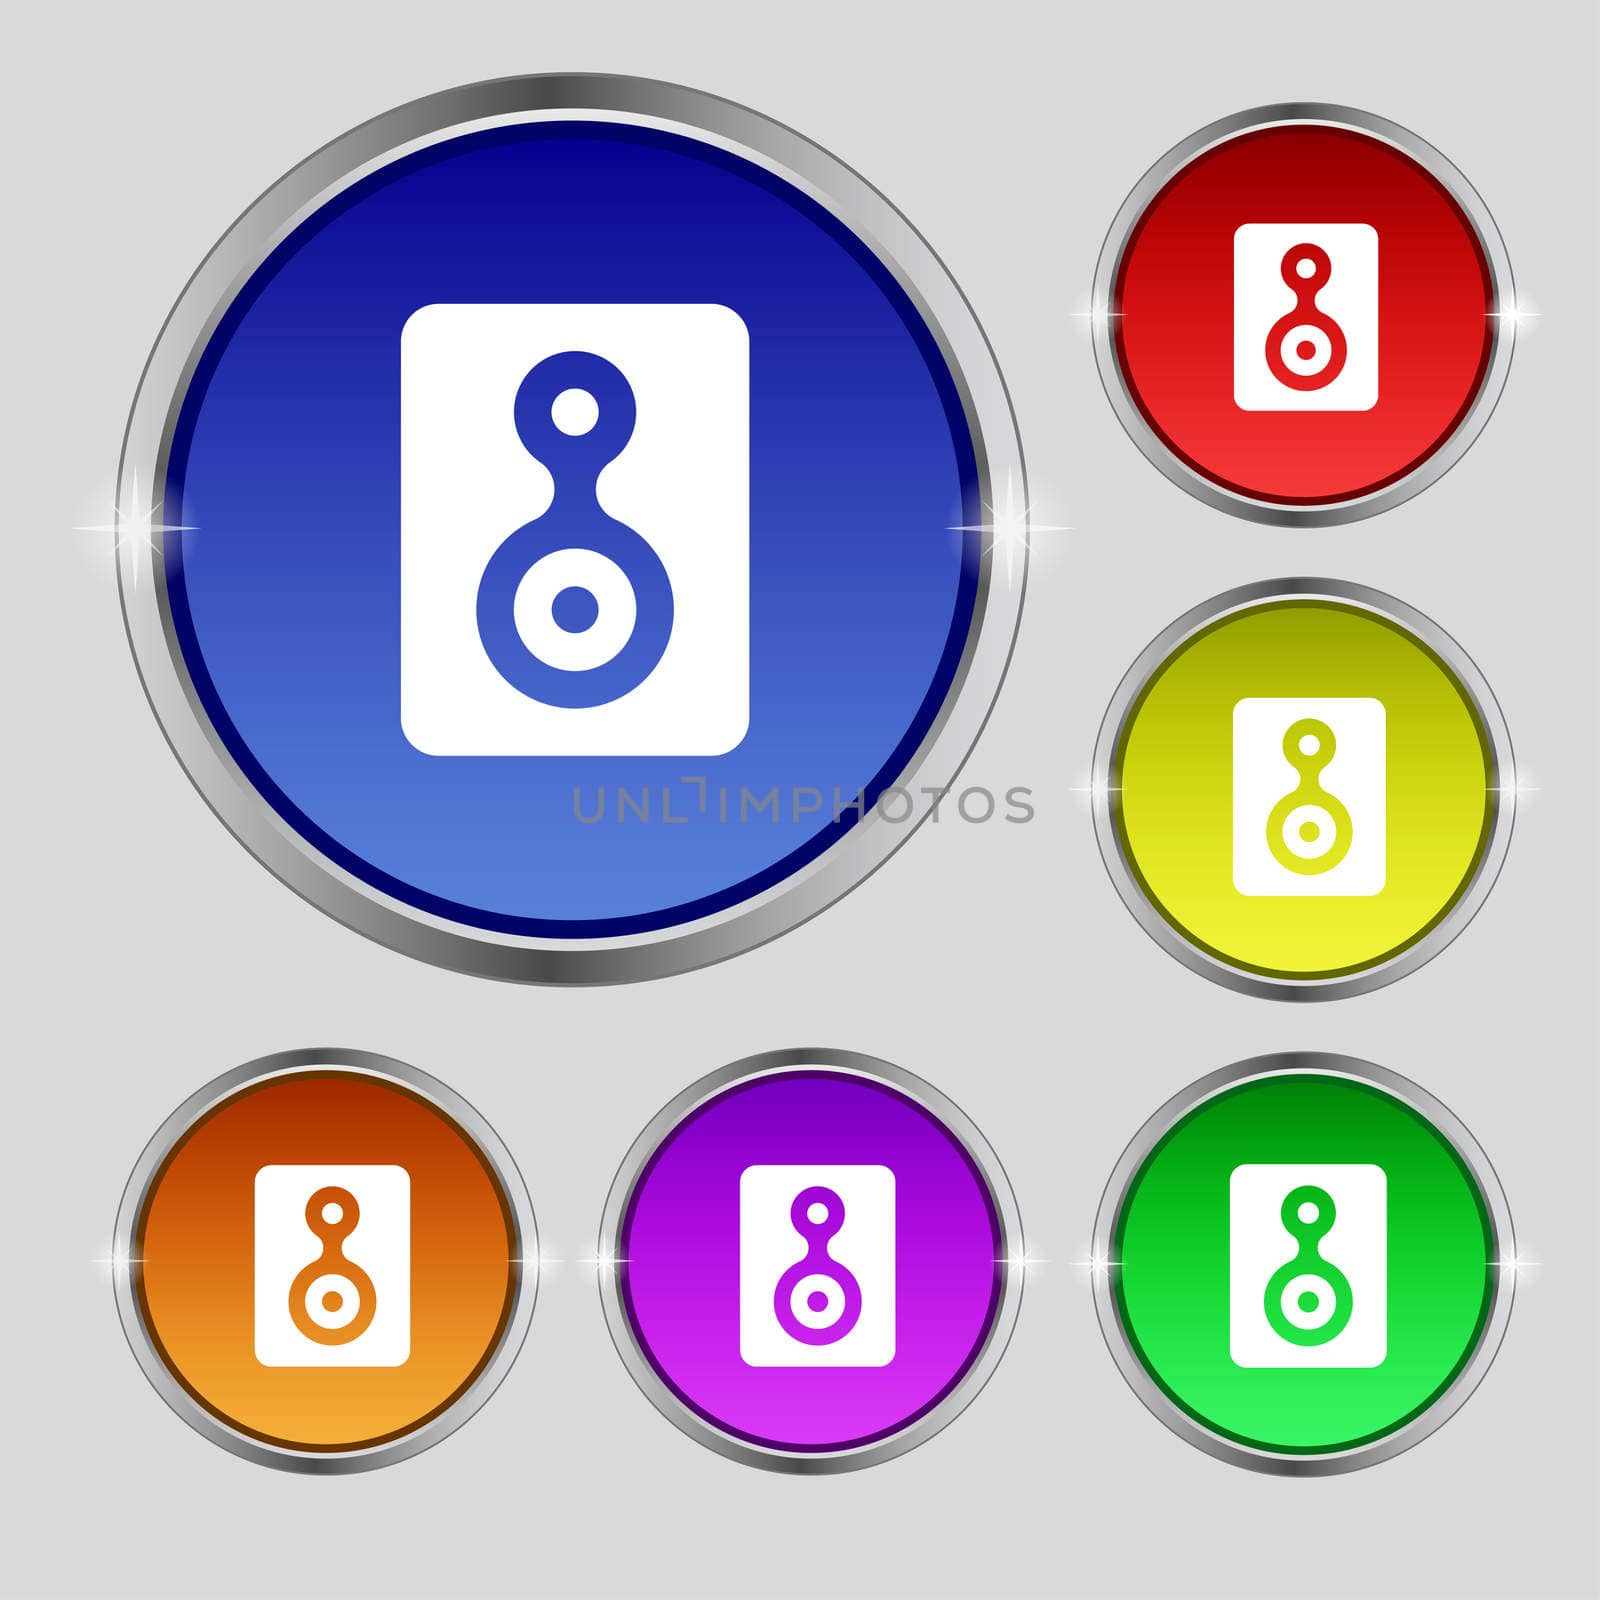 Video Tape icon sign. Round symbol on bright colourful buttons. illustration